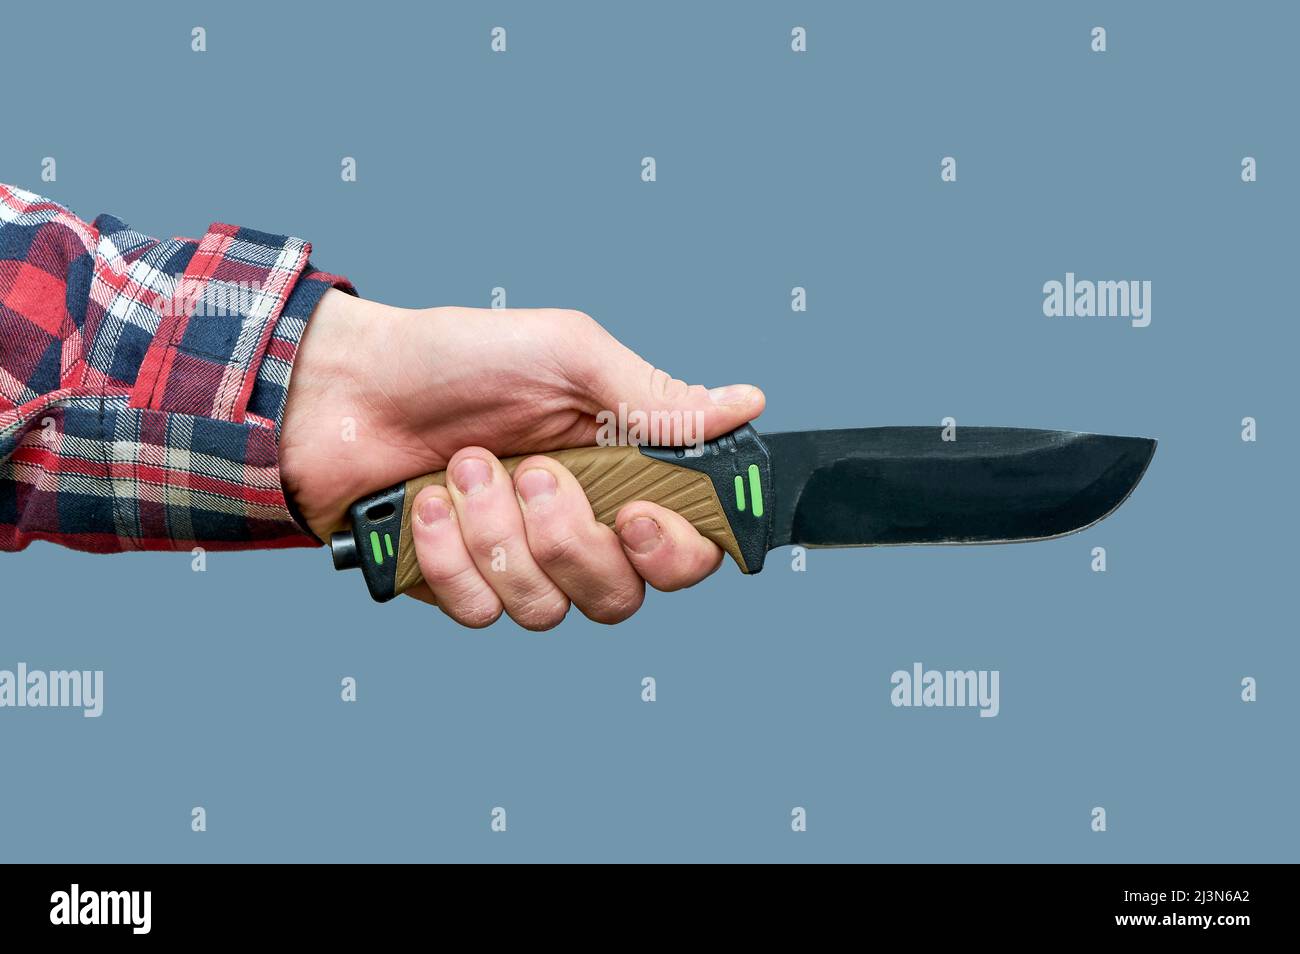 a man's hand holds a large tactical knife with a plastic handle on a gray background Stock Photo